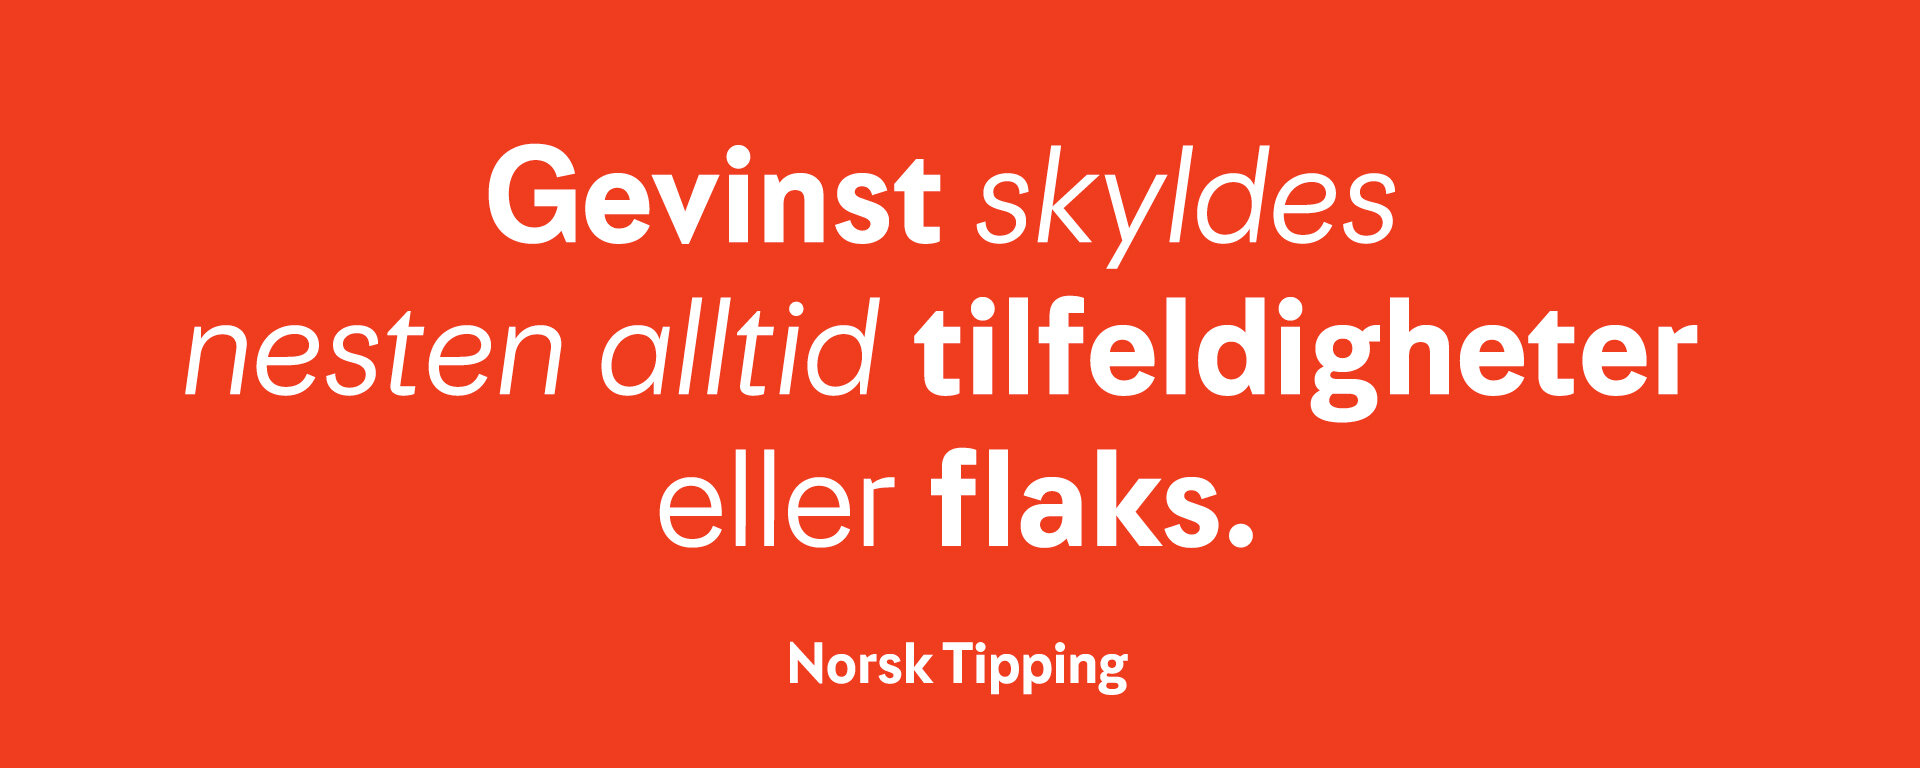 Norsk-Tipping5.jpg